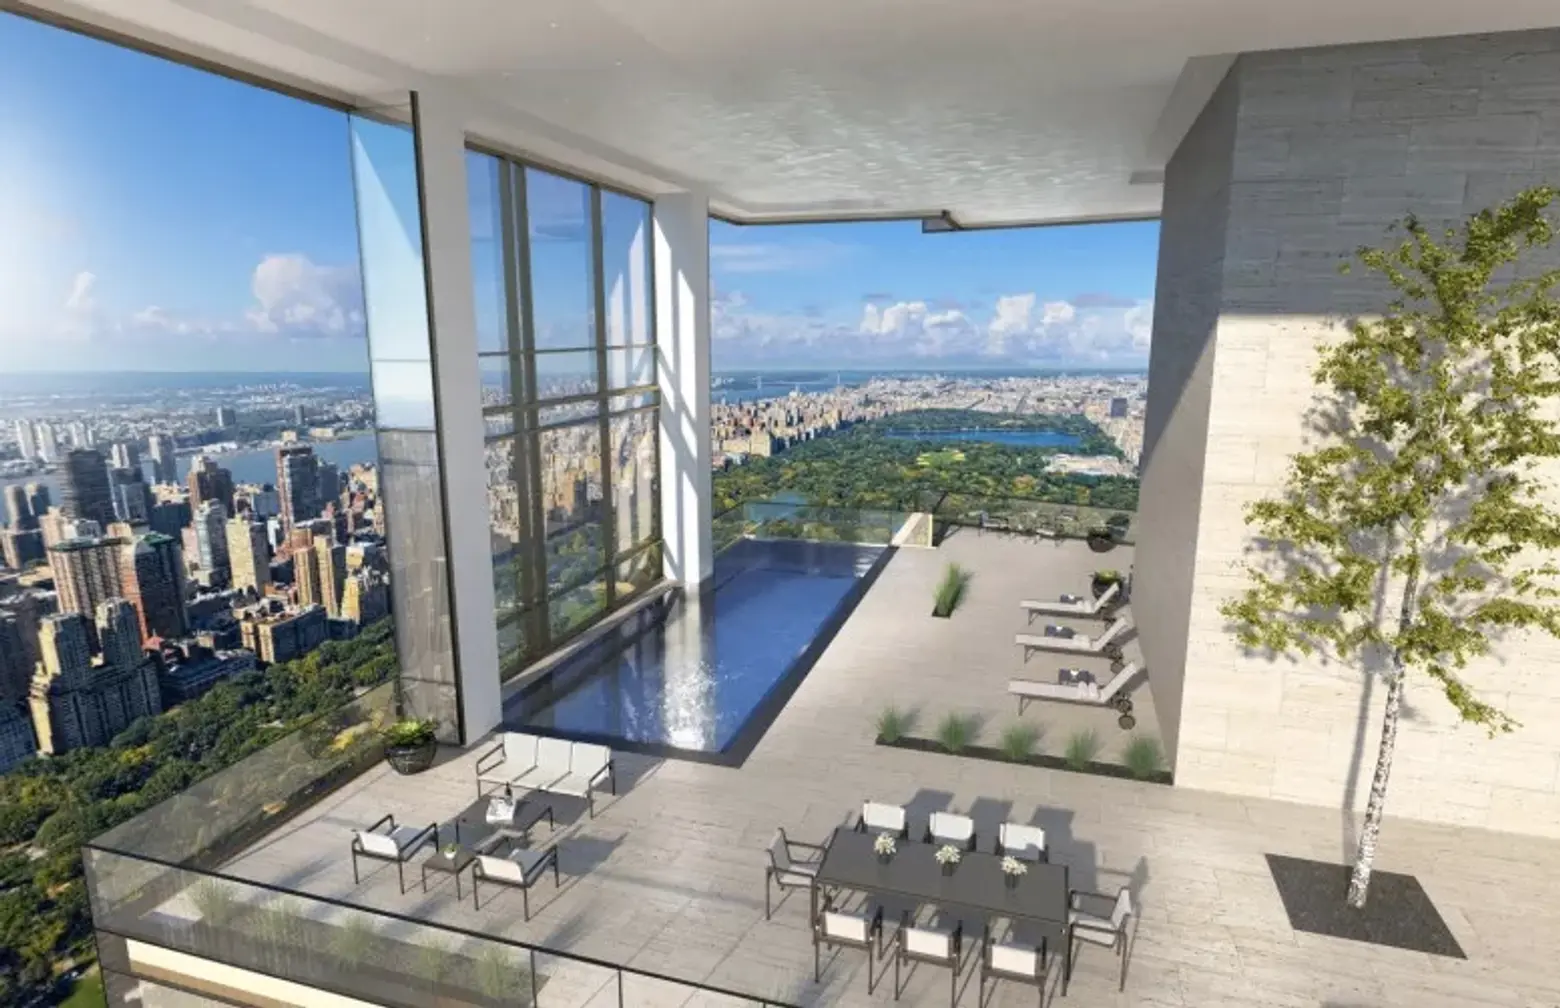 Interior Renderings Revealed for Central Park South’s Brand New 1,210-Foot Supertall